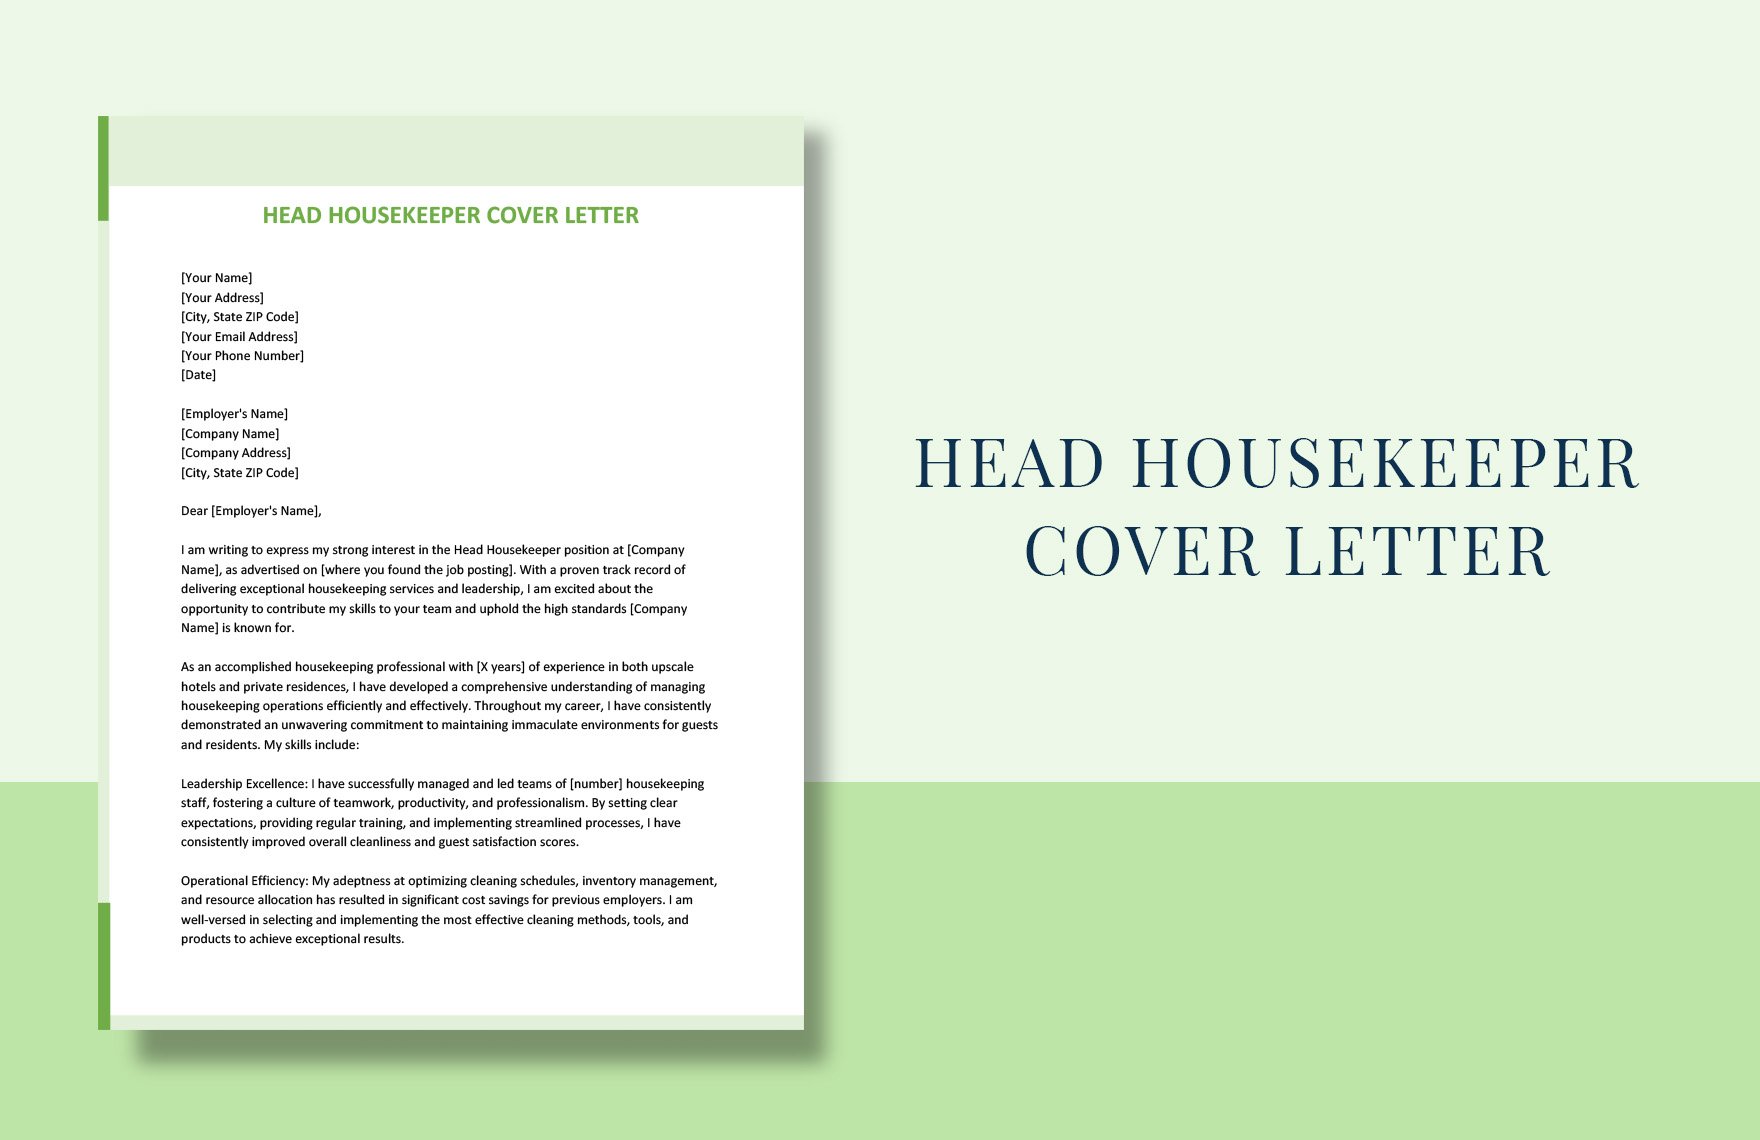 Head Housekeeper Cover Letter in Word, Google Docs